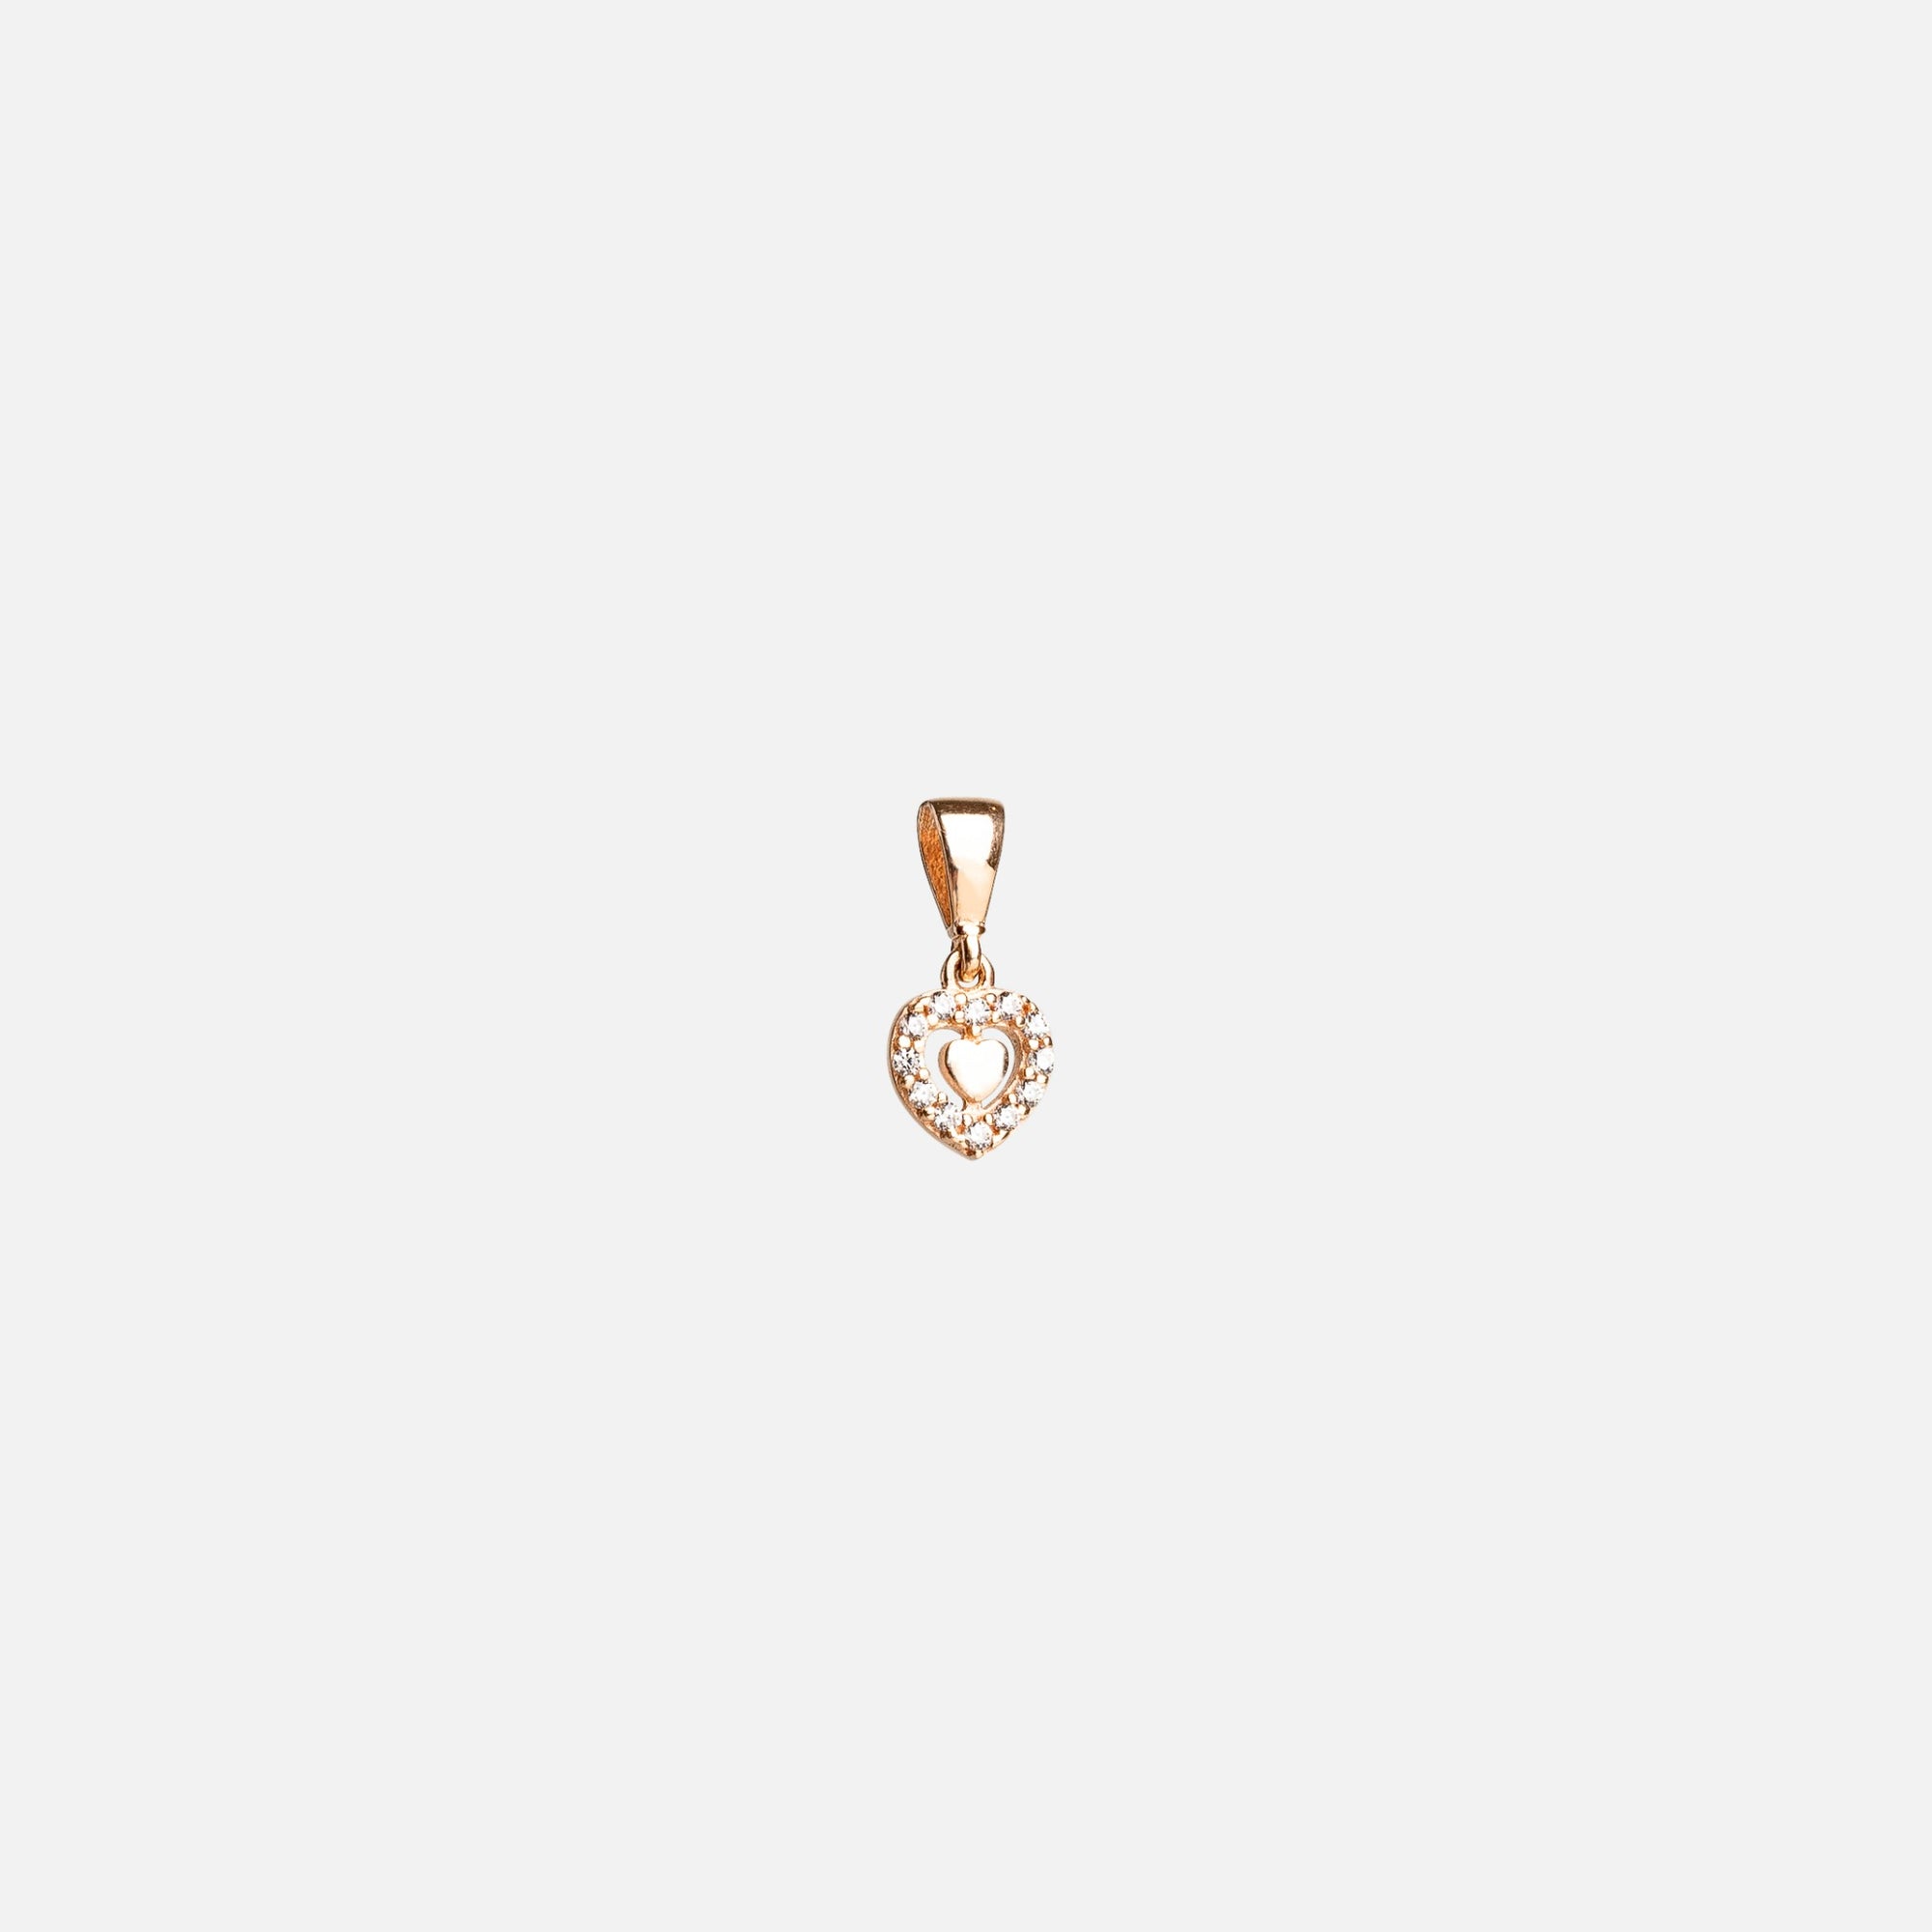 10k yellow gold small rose gold heart charm 